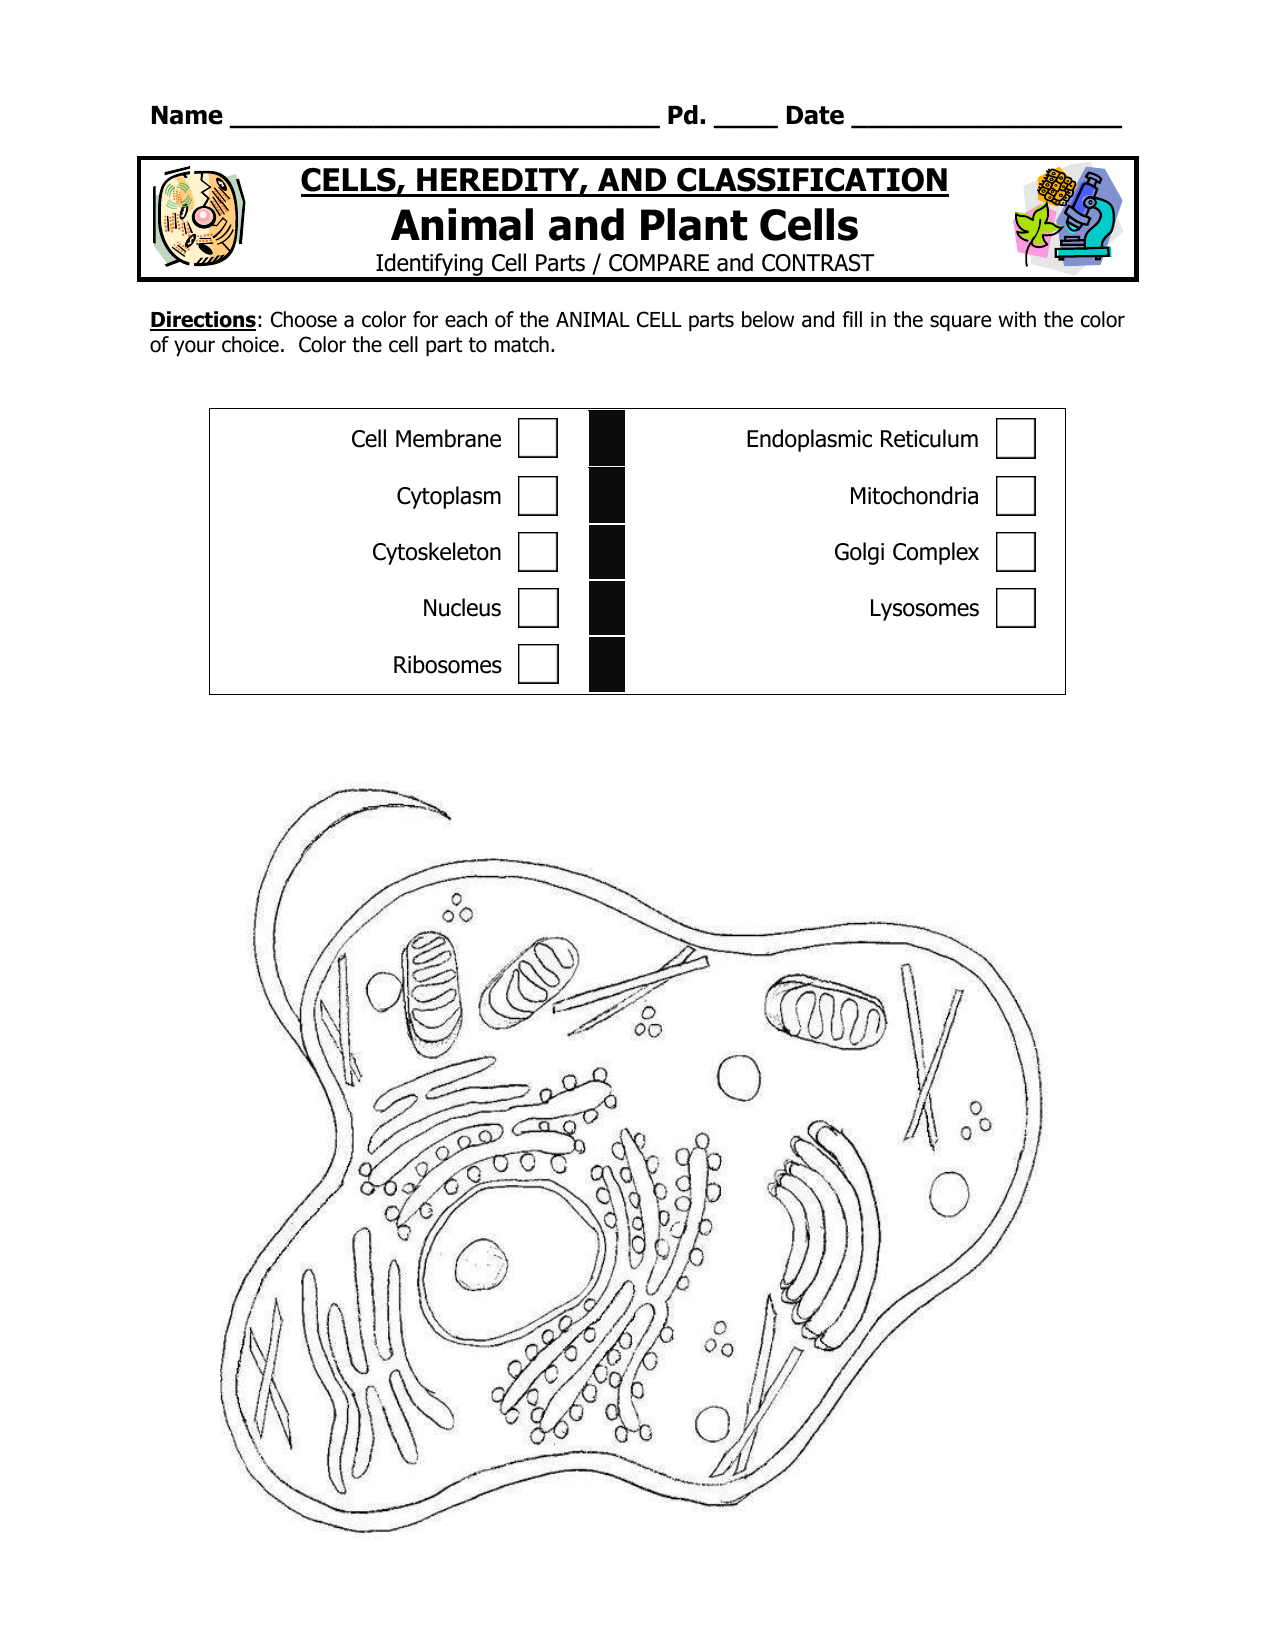 Animal and Plant Cells Coloring Pages Regarding Plant Cell Coloring Worksheet